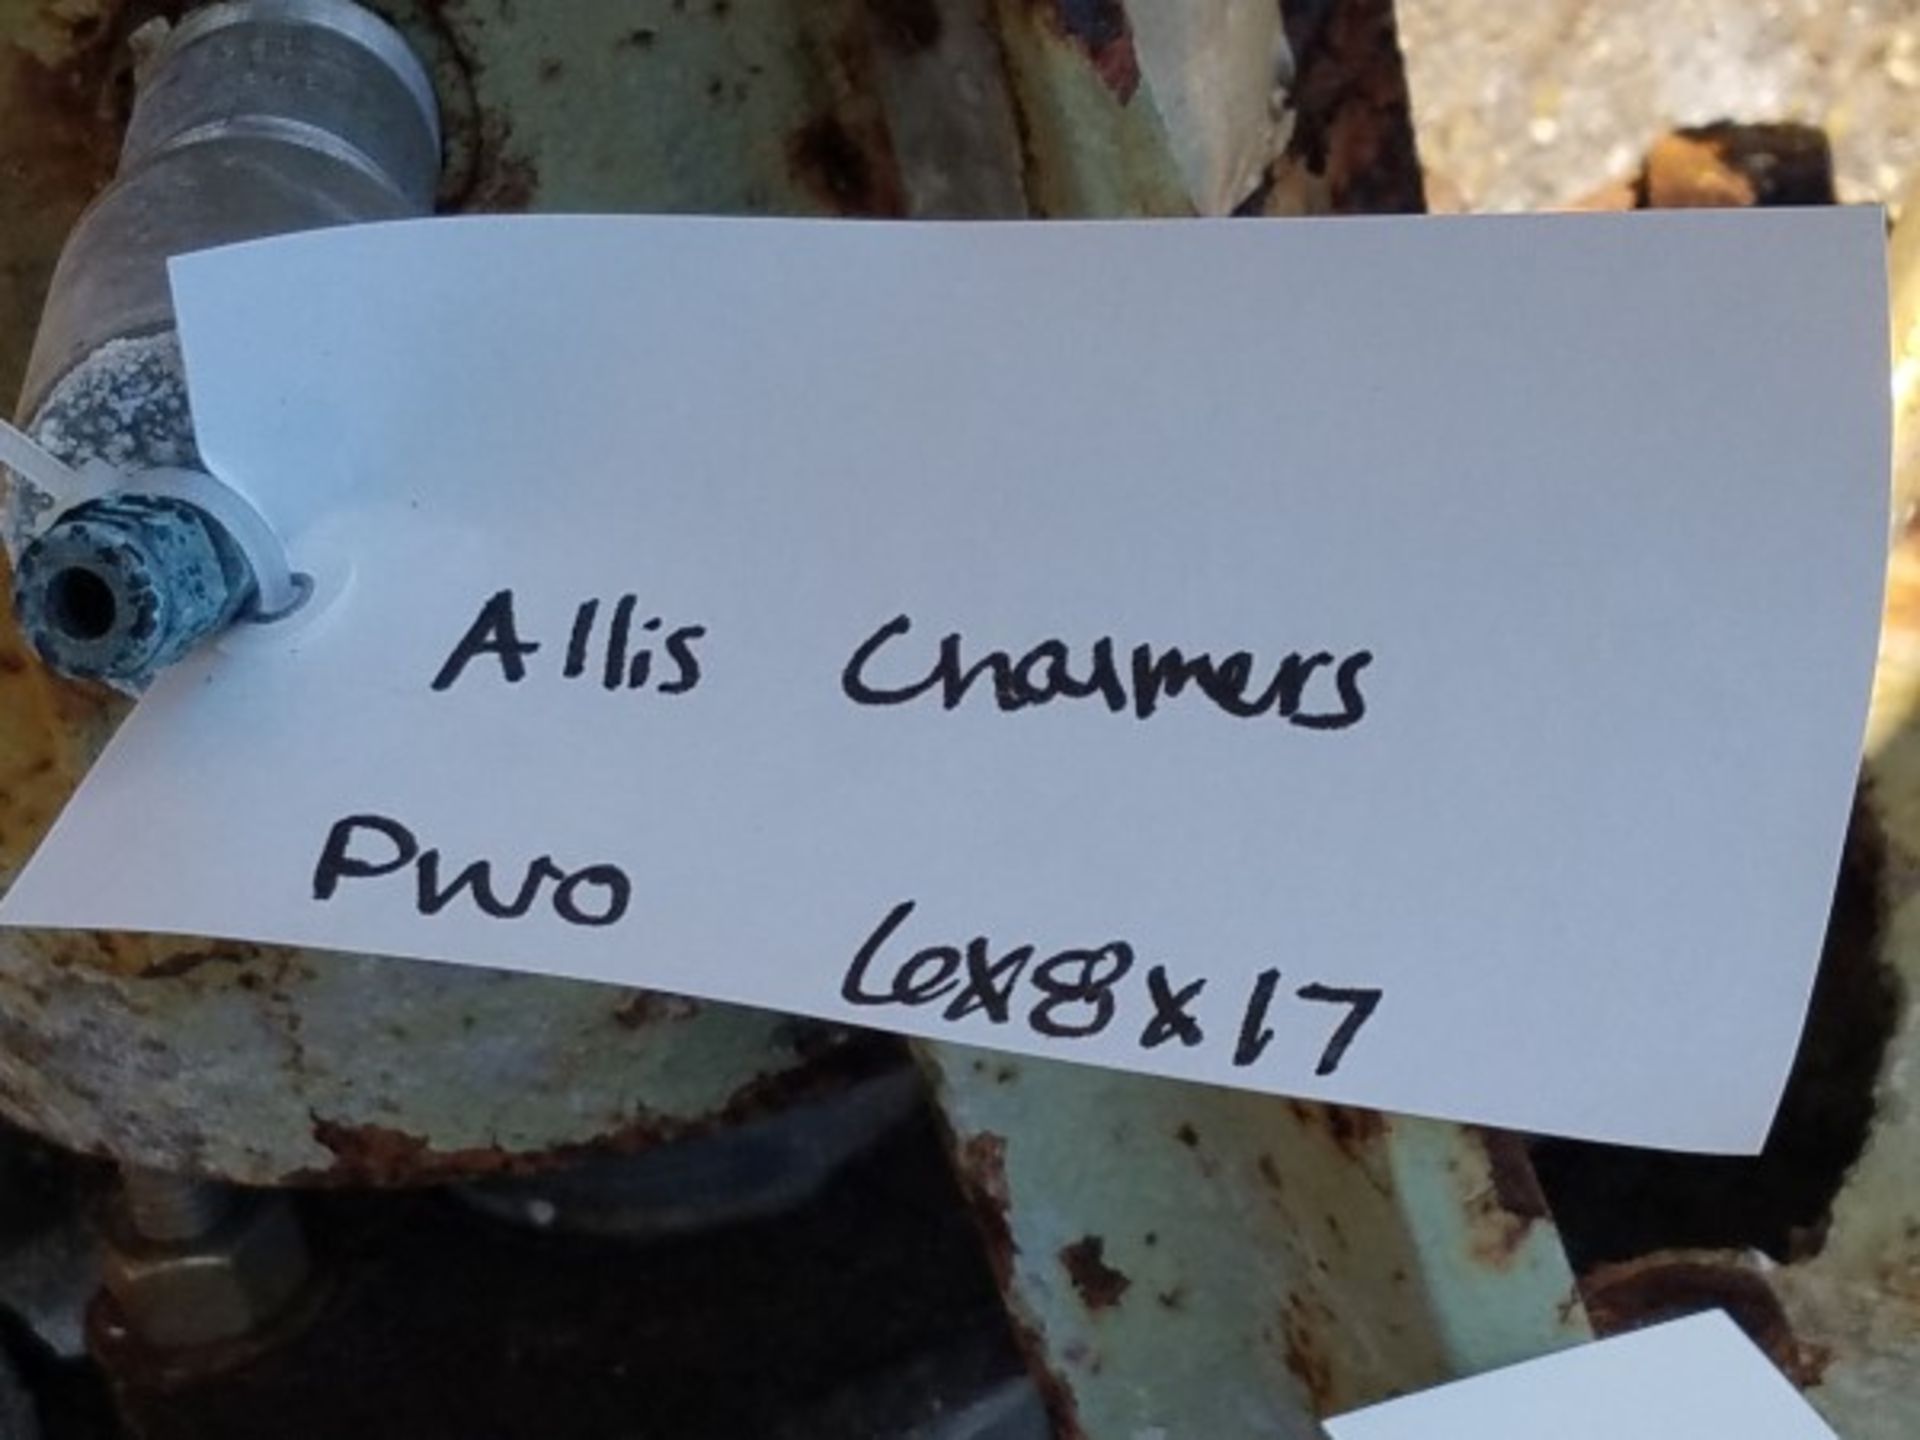 Allis Chalmers 6 x 8 x 17 PWO Pump | Seller to load for $10 per lot or buyers may remove hand - Image 2 of 2